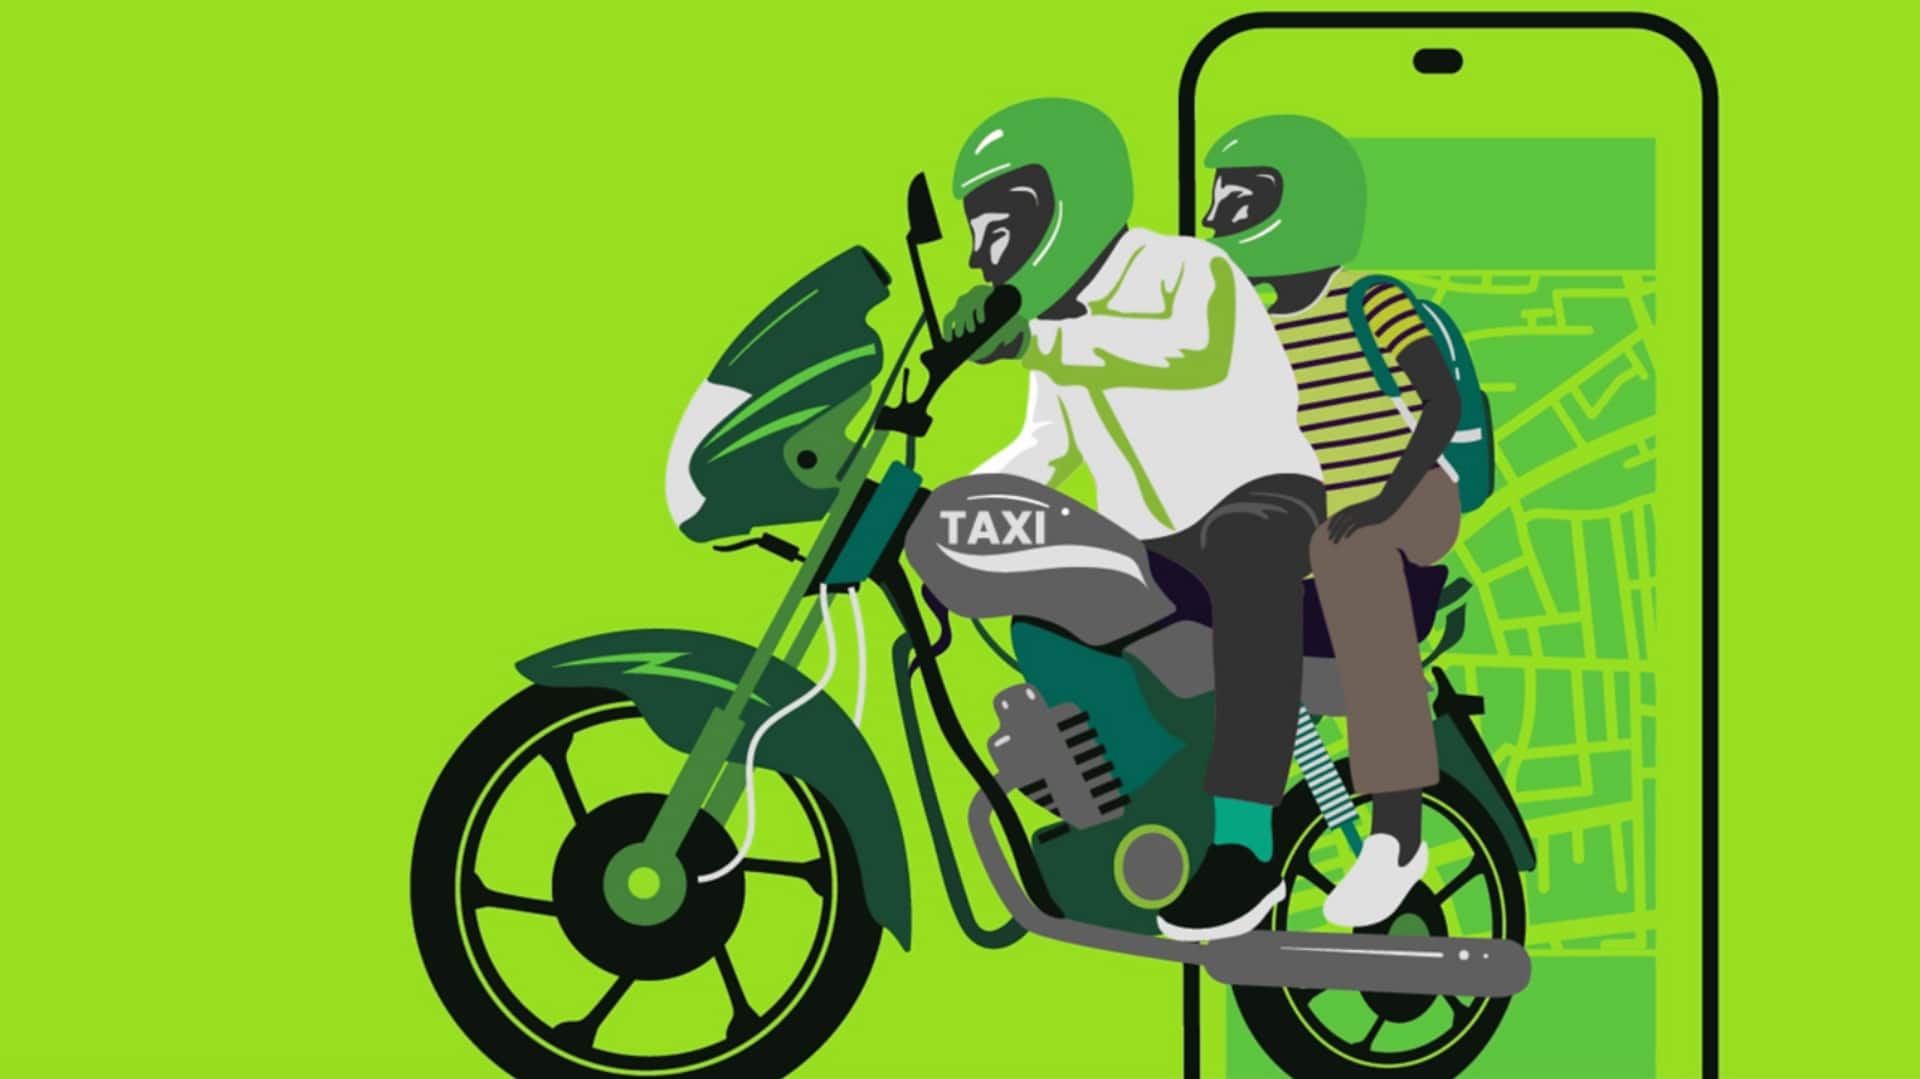 Delhi to phase out fuel-powered bike taxis by 2030